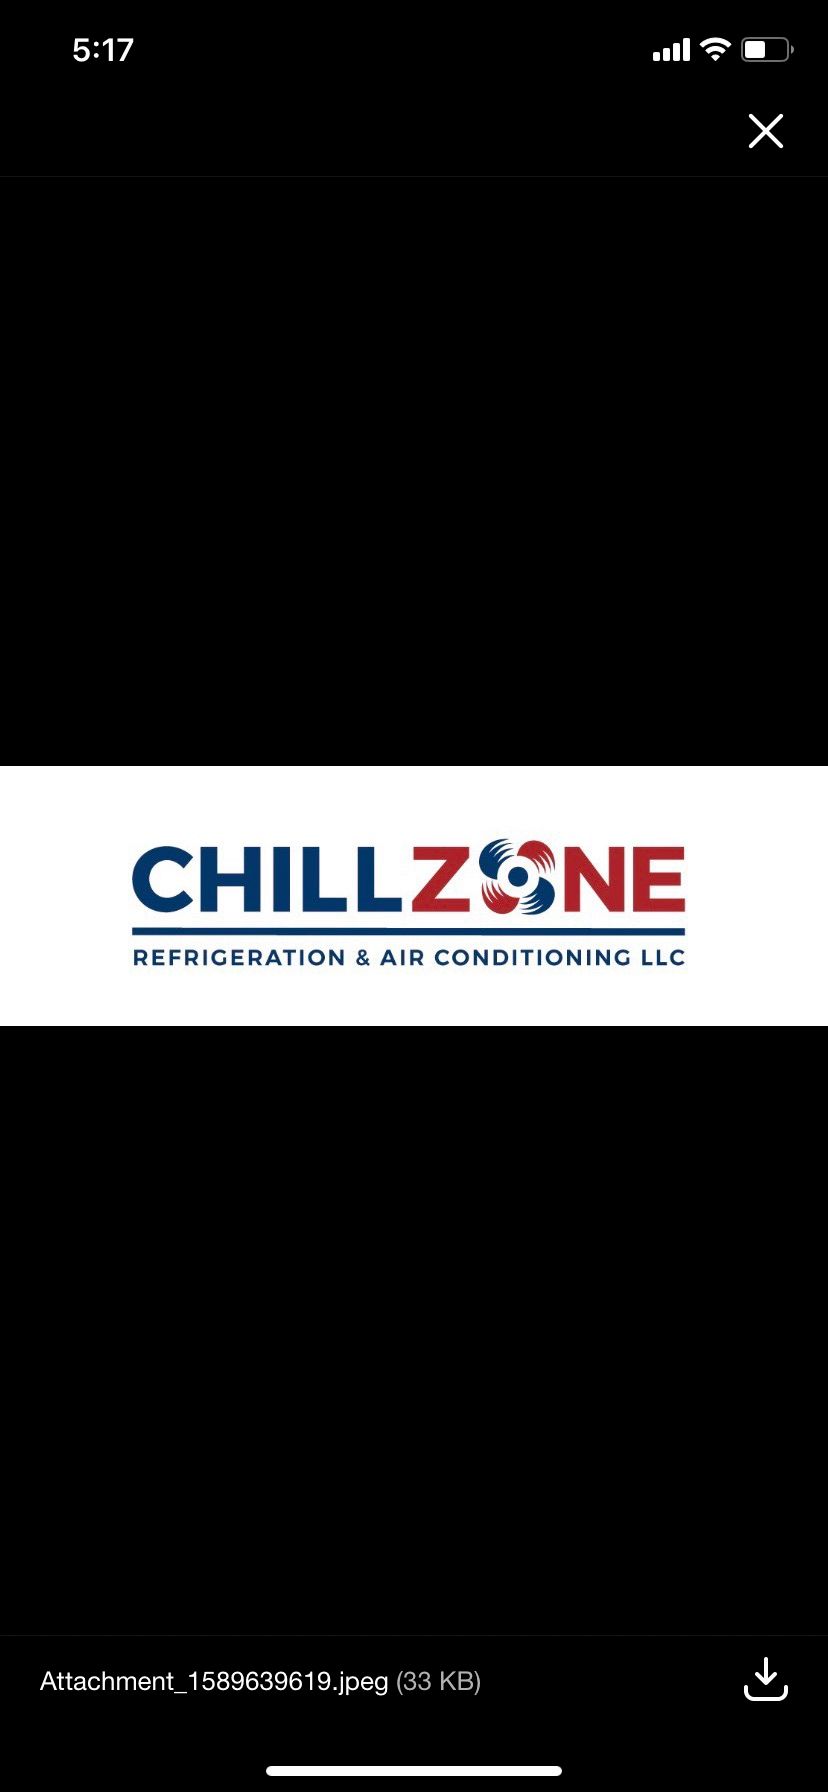 Chillzone refrigeration and air conditioning llc